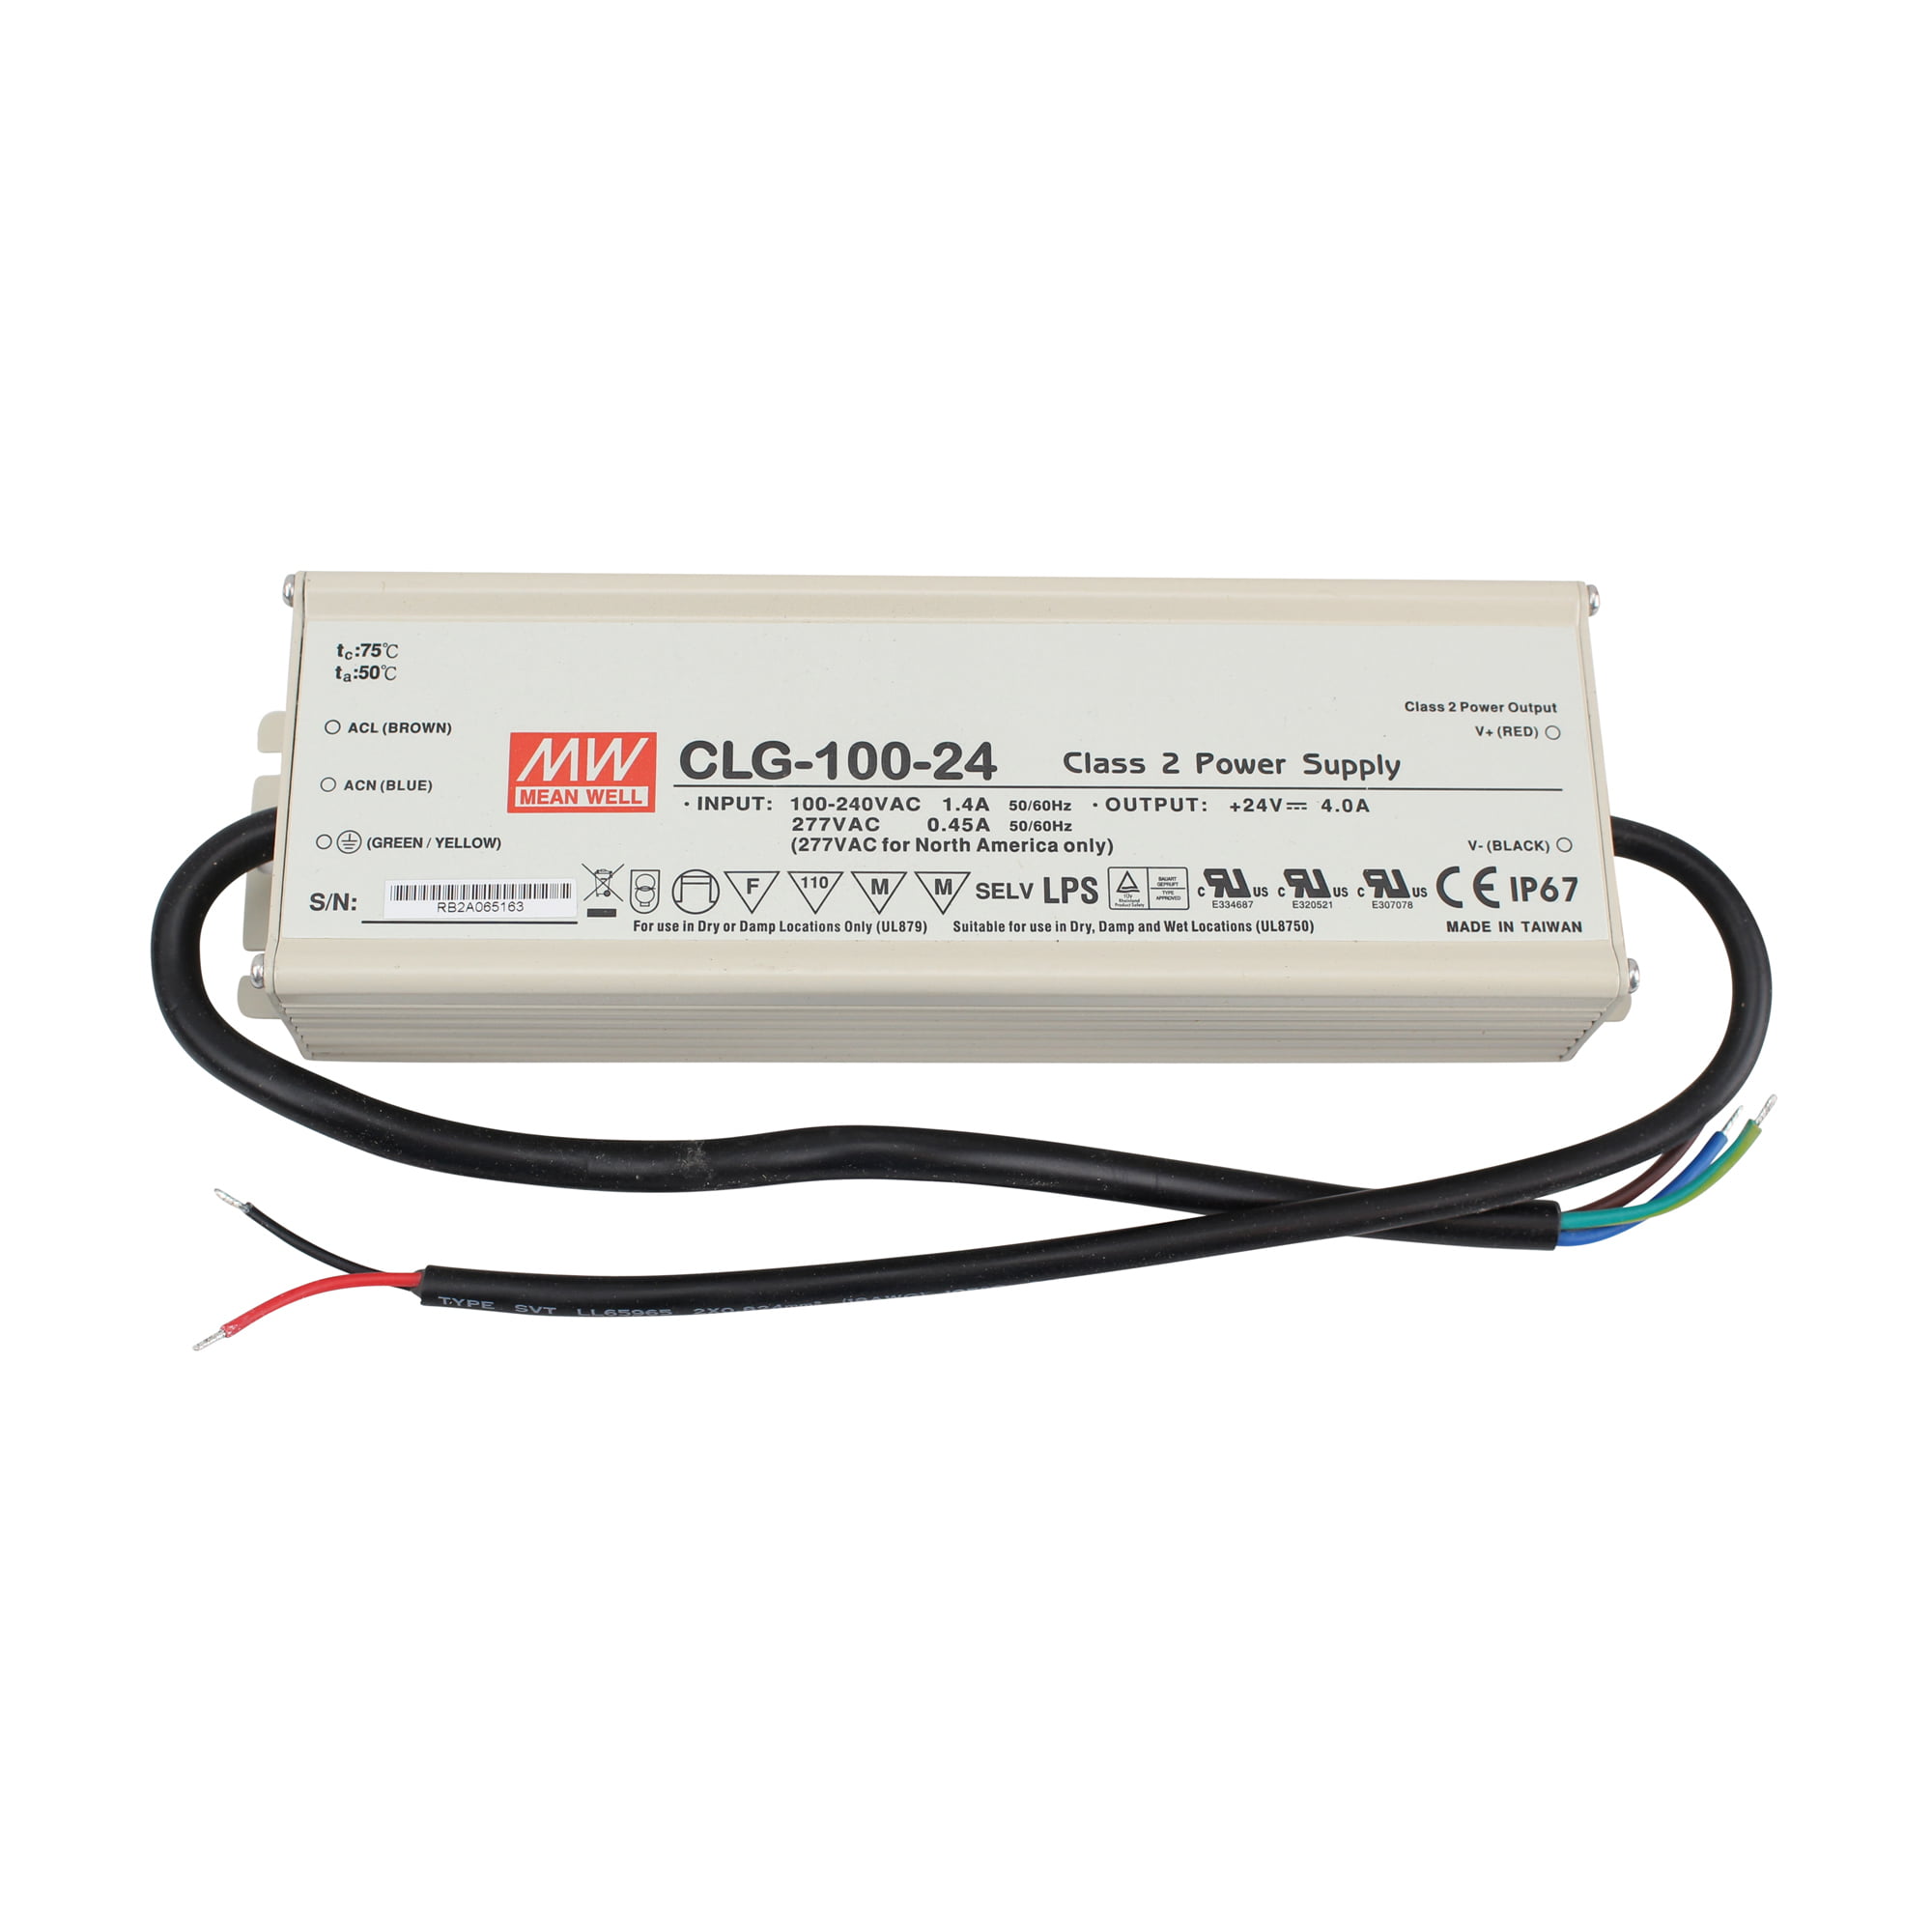 Mean Well CLG-100-24 AC/DC Power Supply